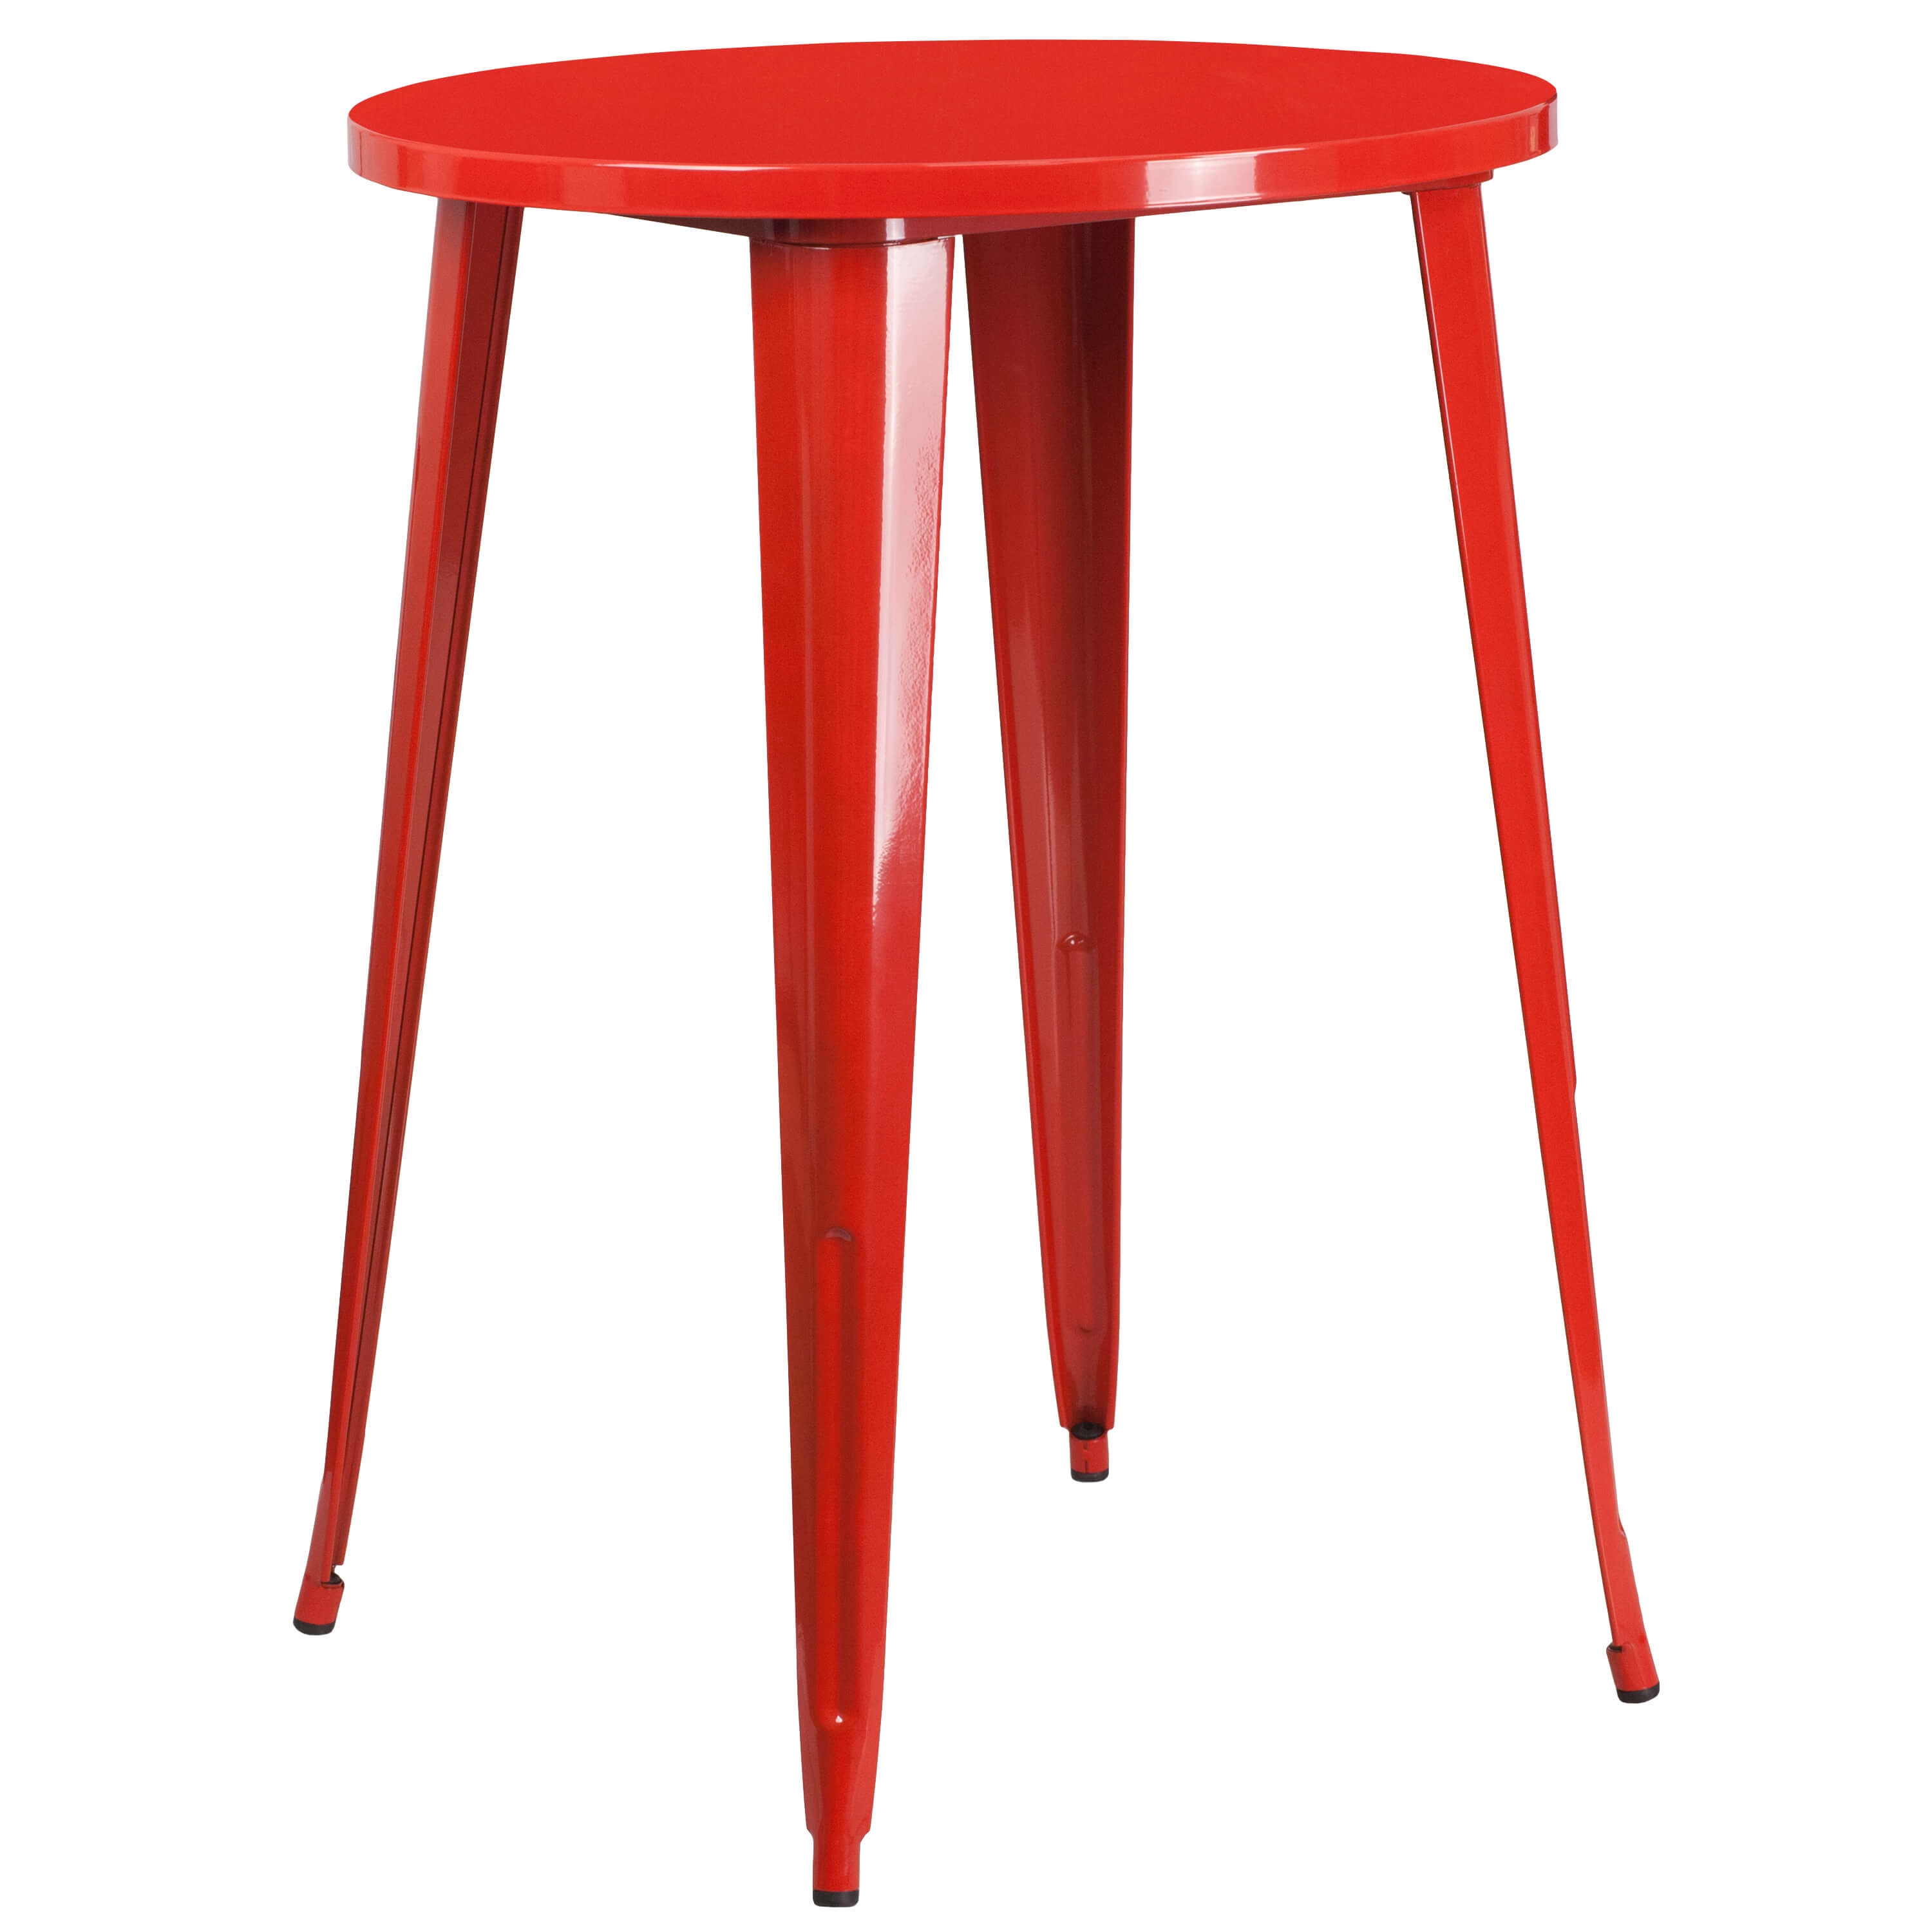 Cafe table CUB CH 51090 40 RED GG FLA